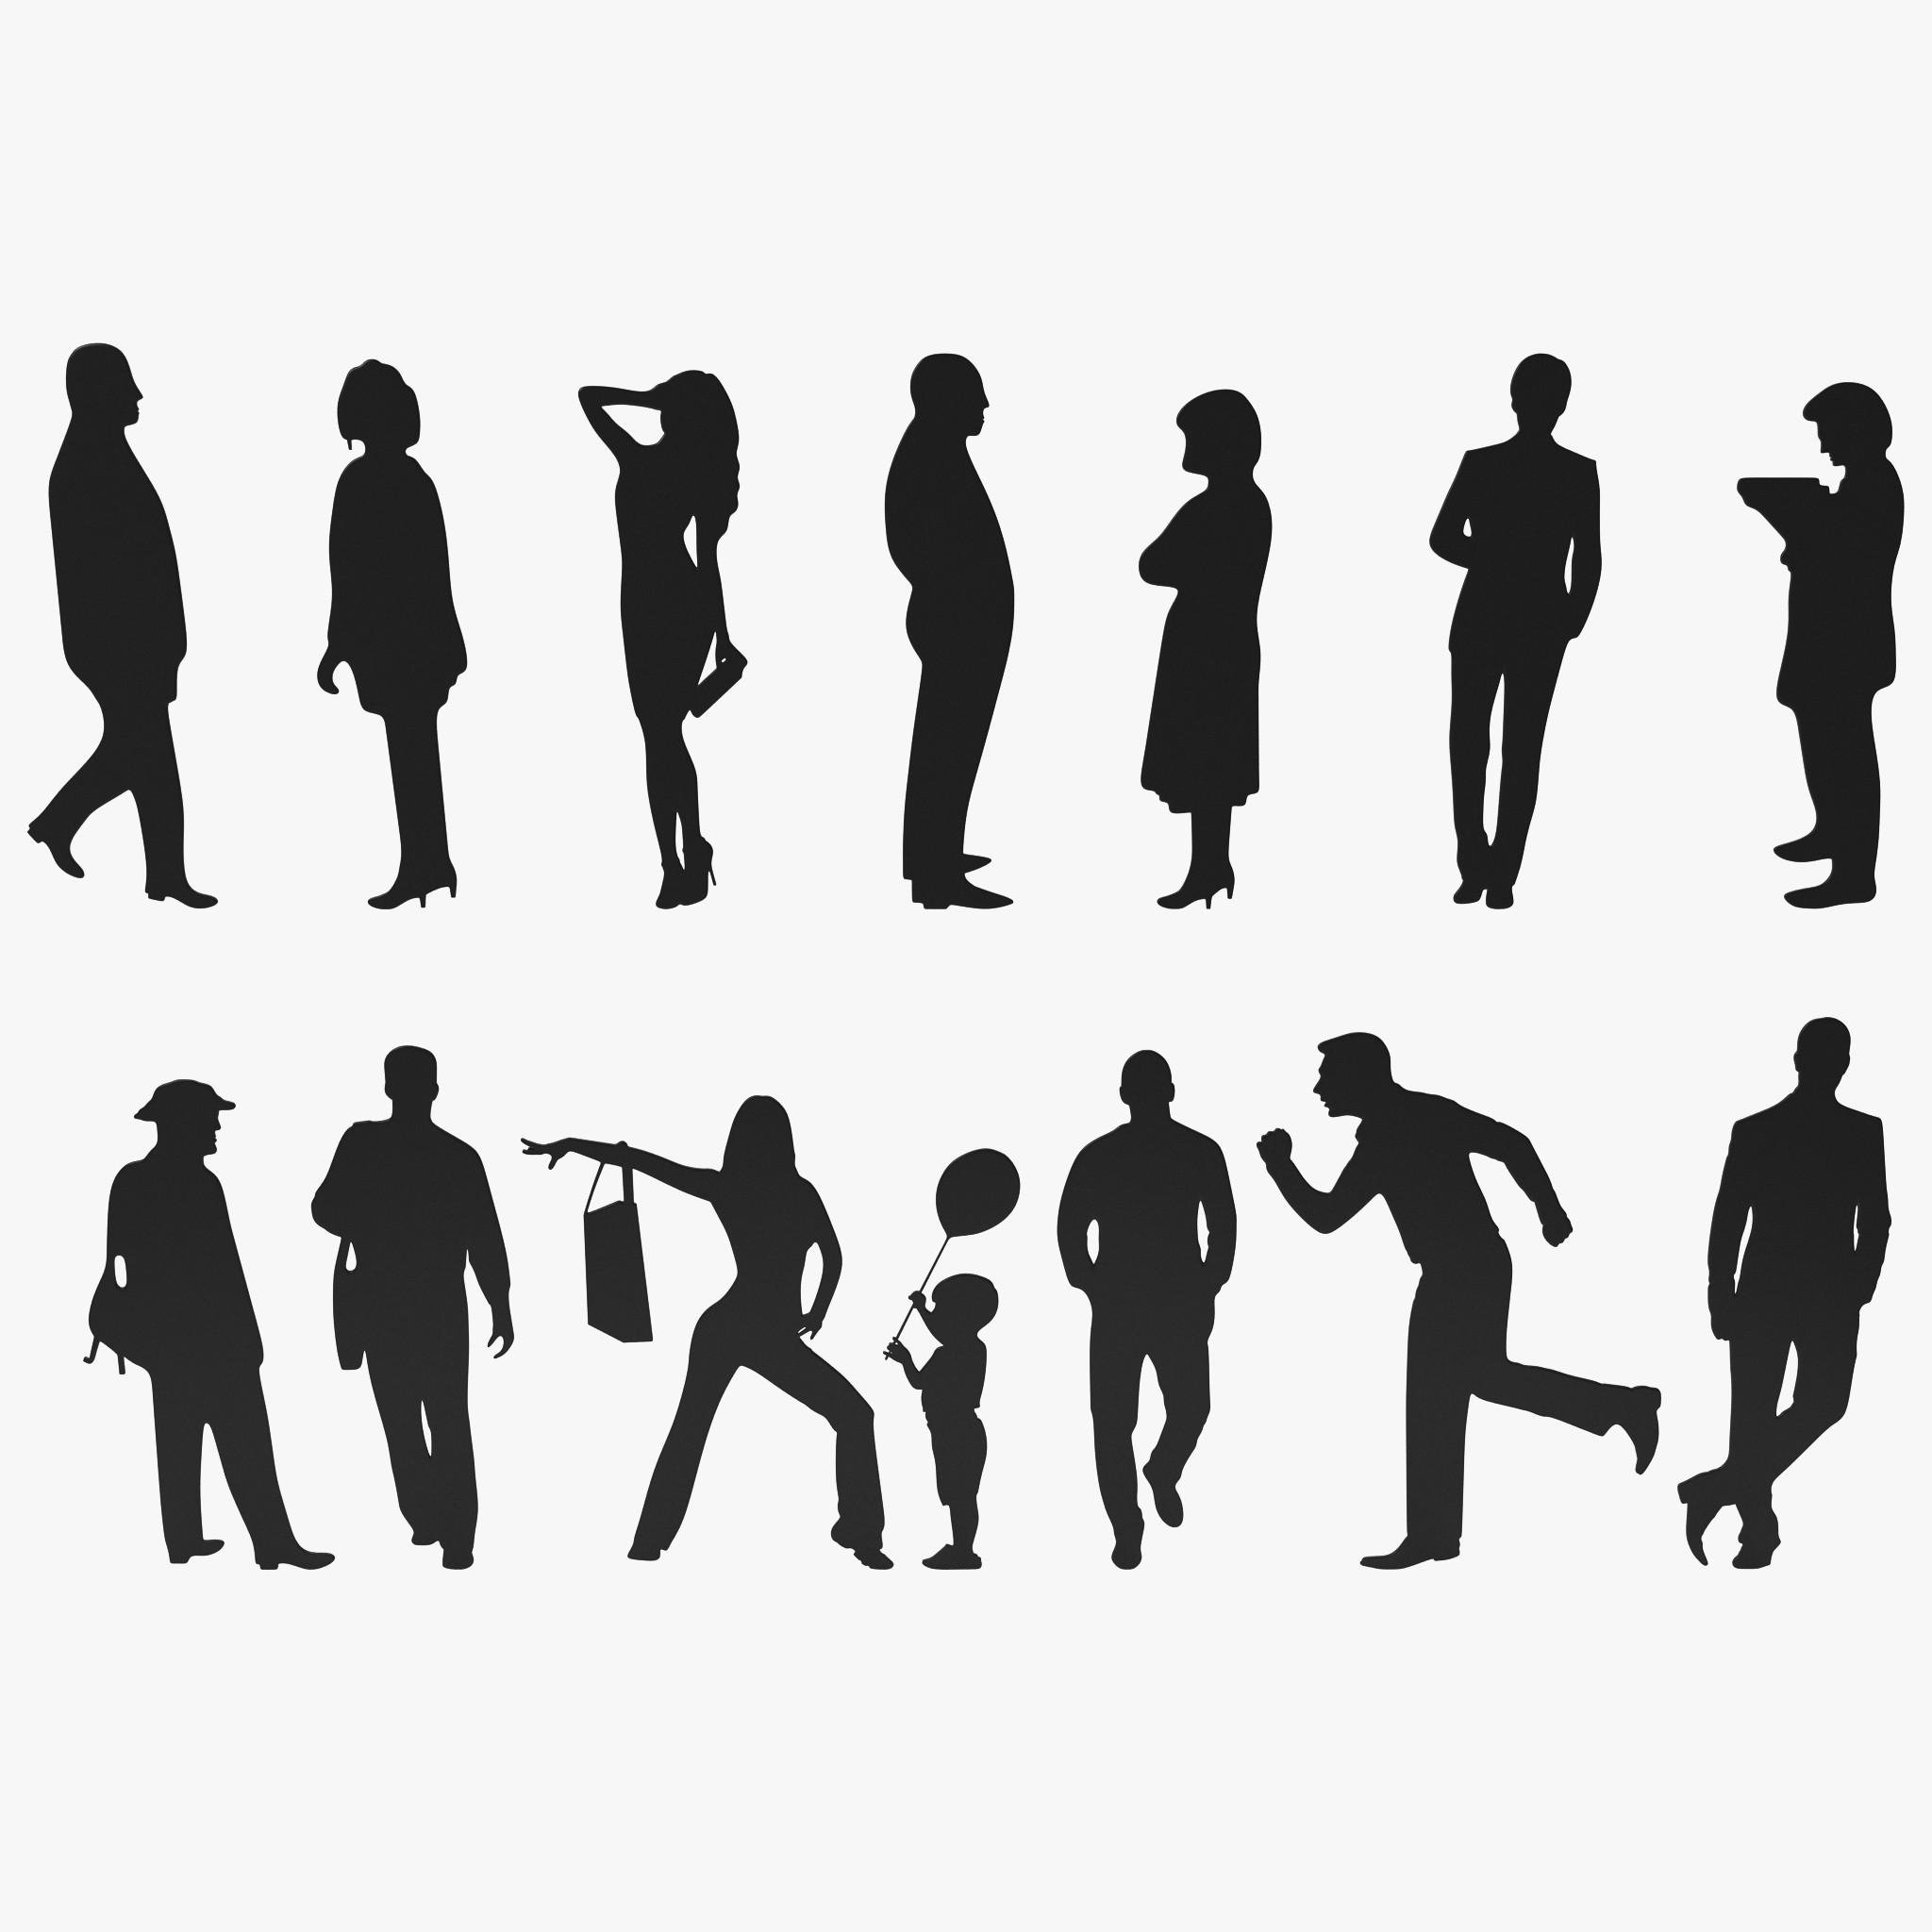 Architectural People Silhouettes